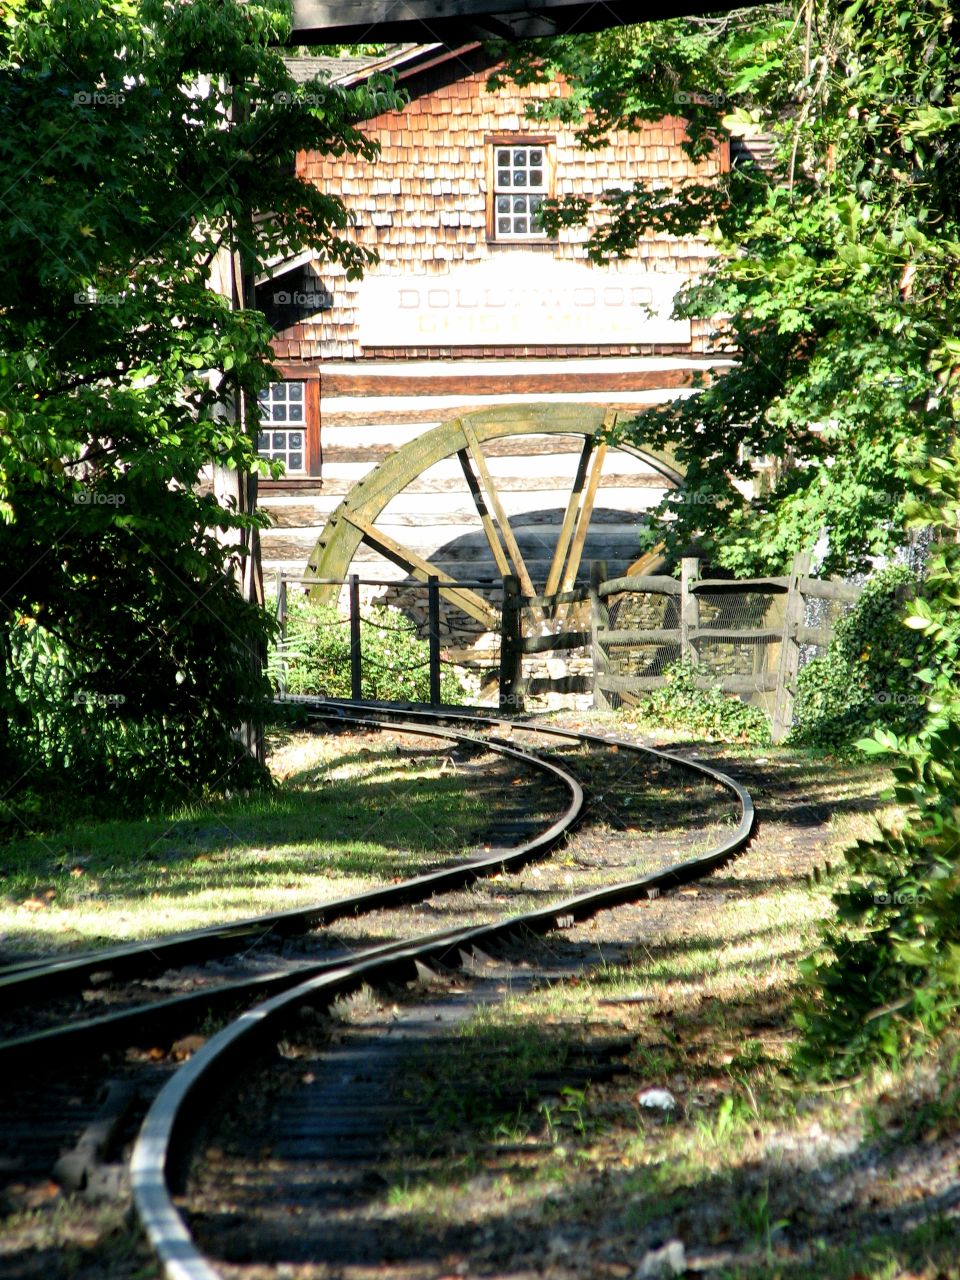 Railroad tracks leading to the mill